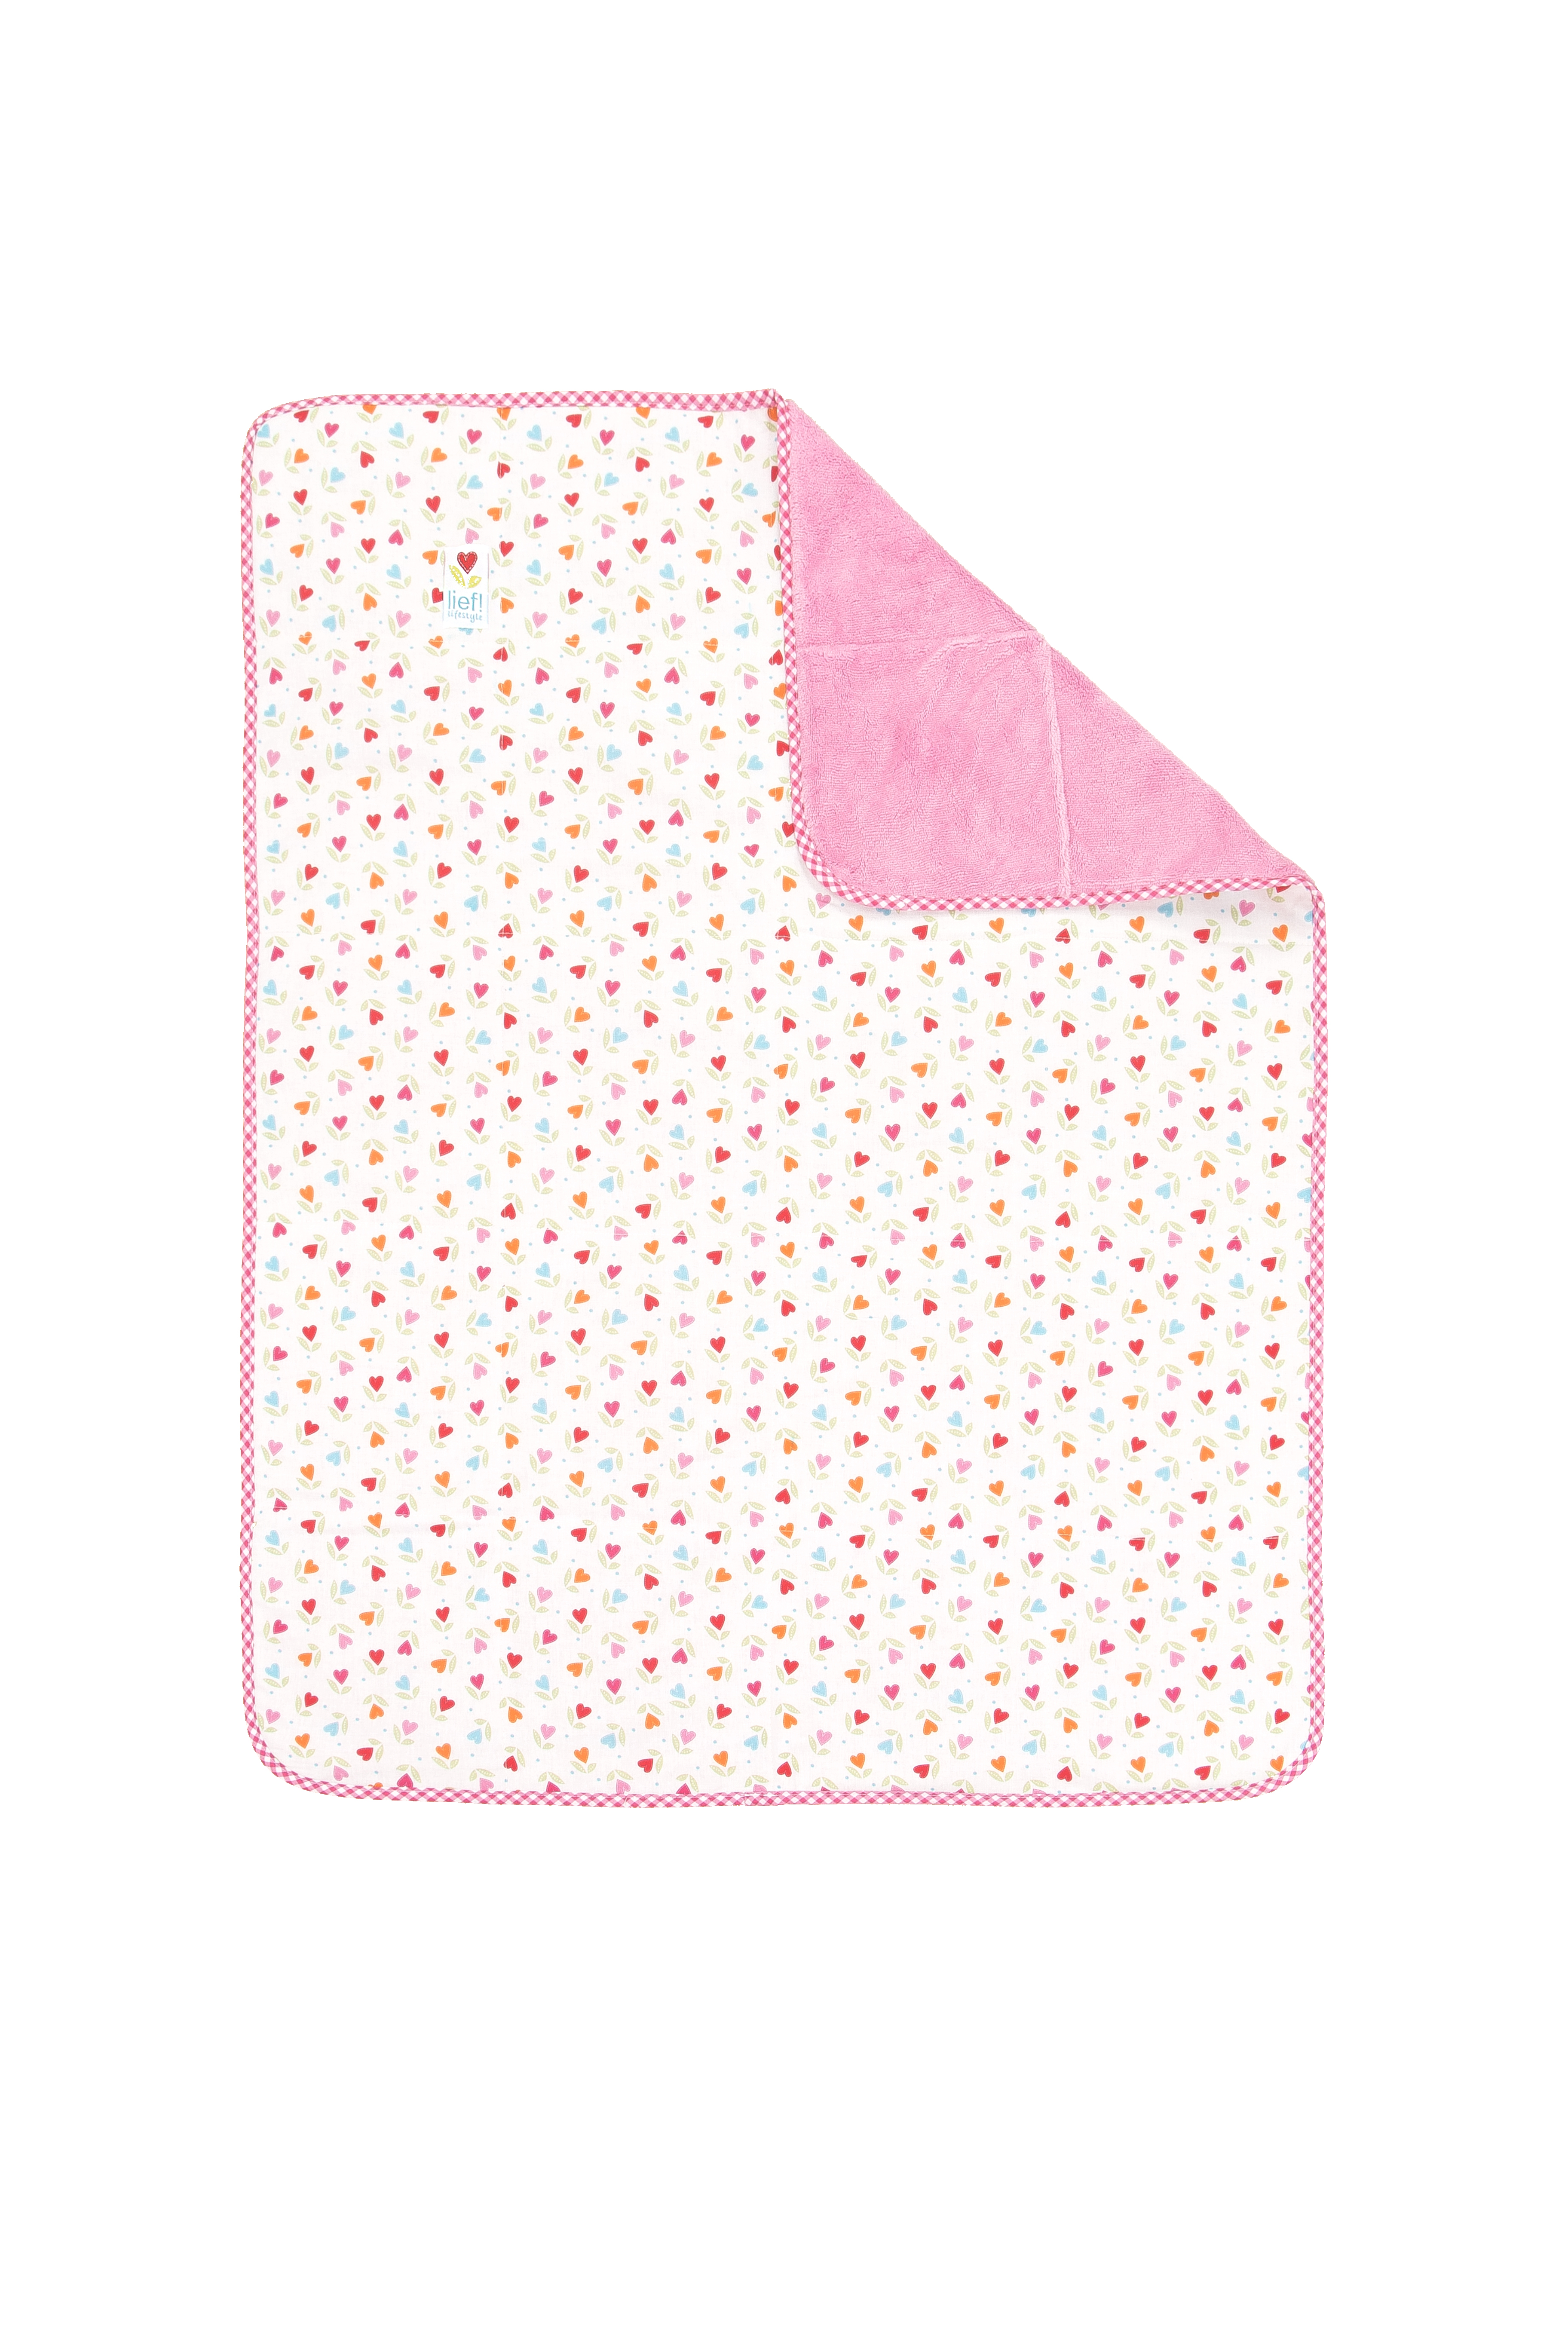 Quilted blanket Girl hearts, 75x100 cm